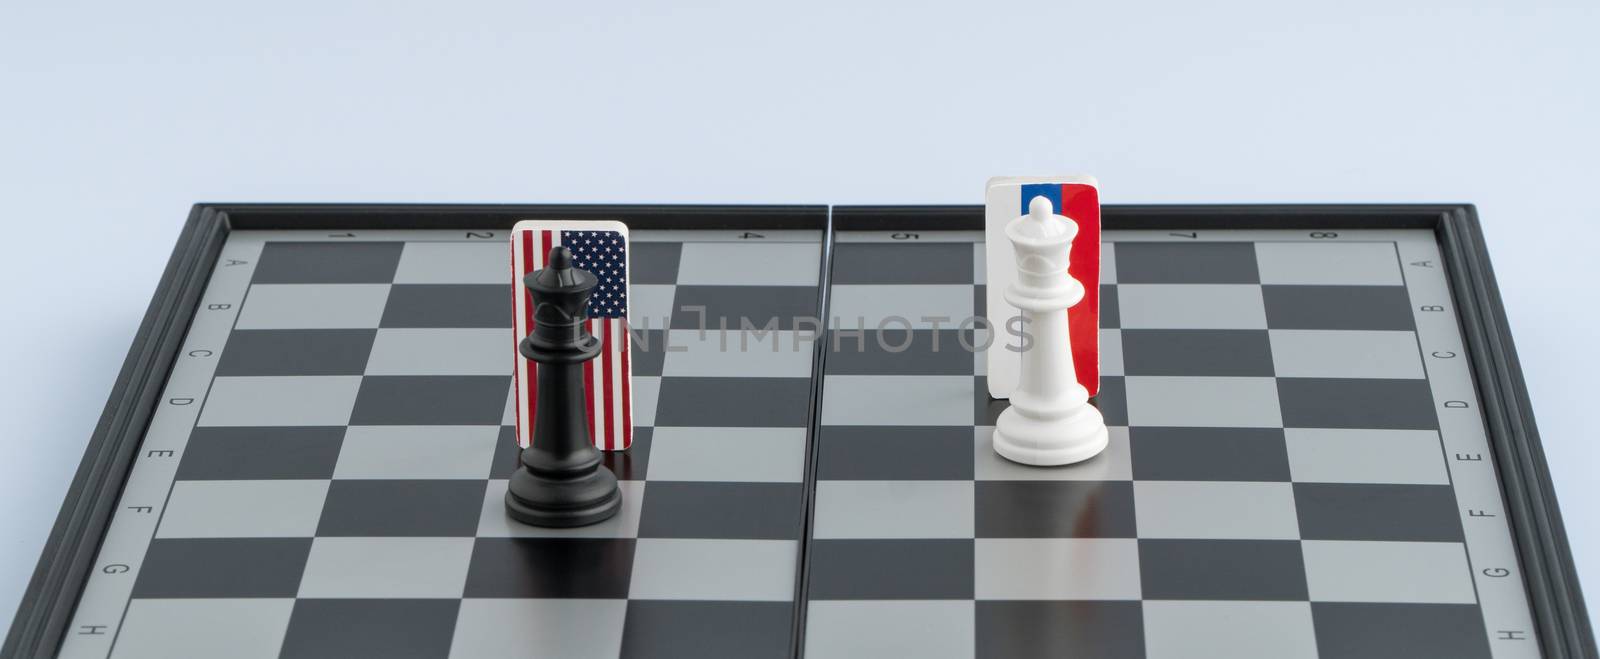 chessboard with flags of countries by A_Karim